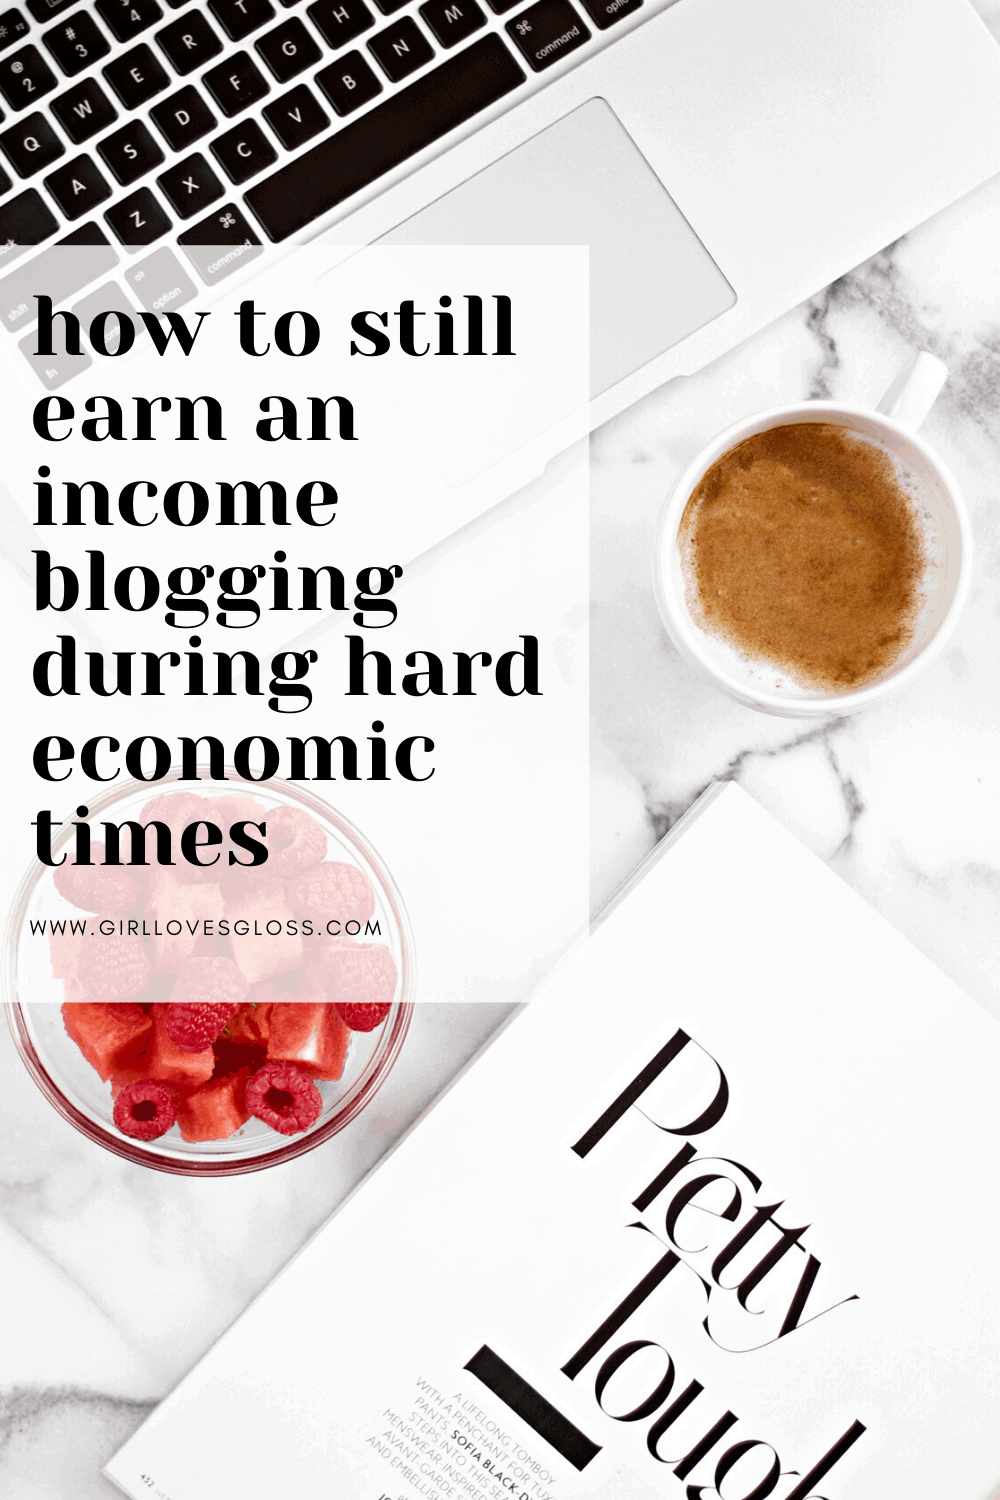 How to make money as a blogger during the covid 19 pandemic